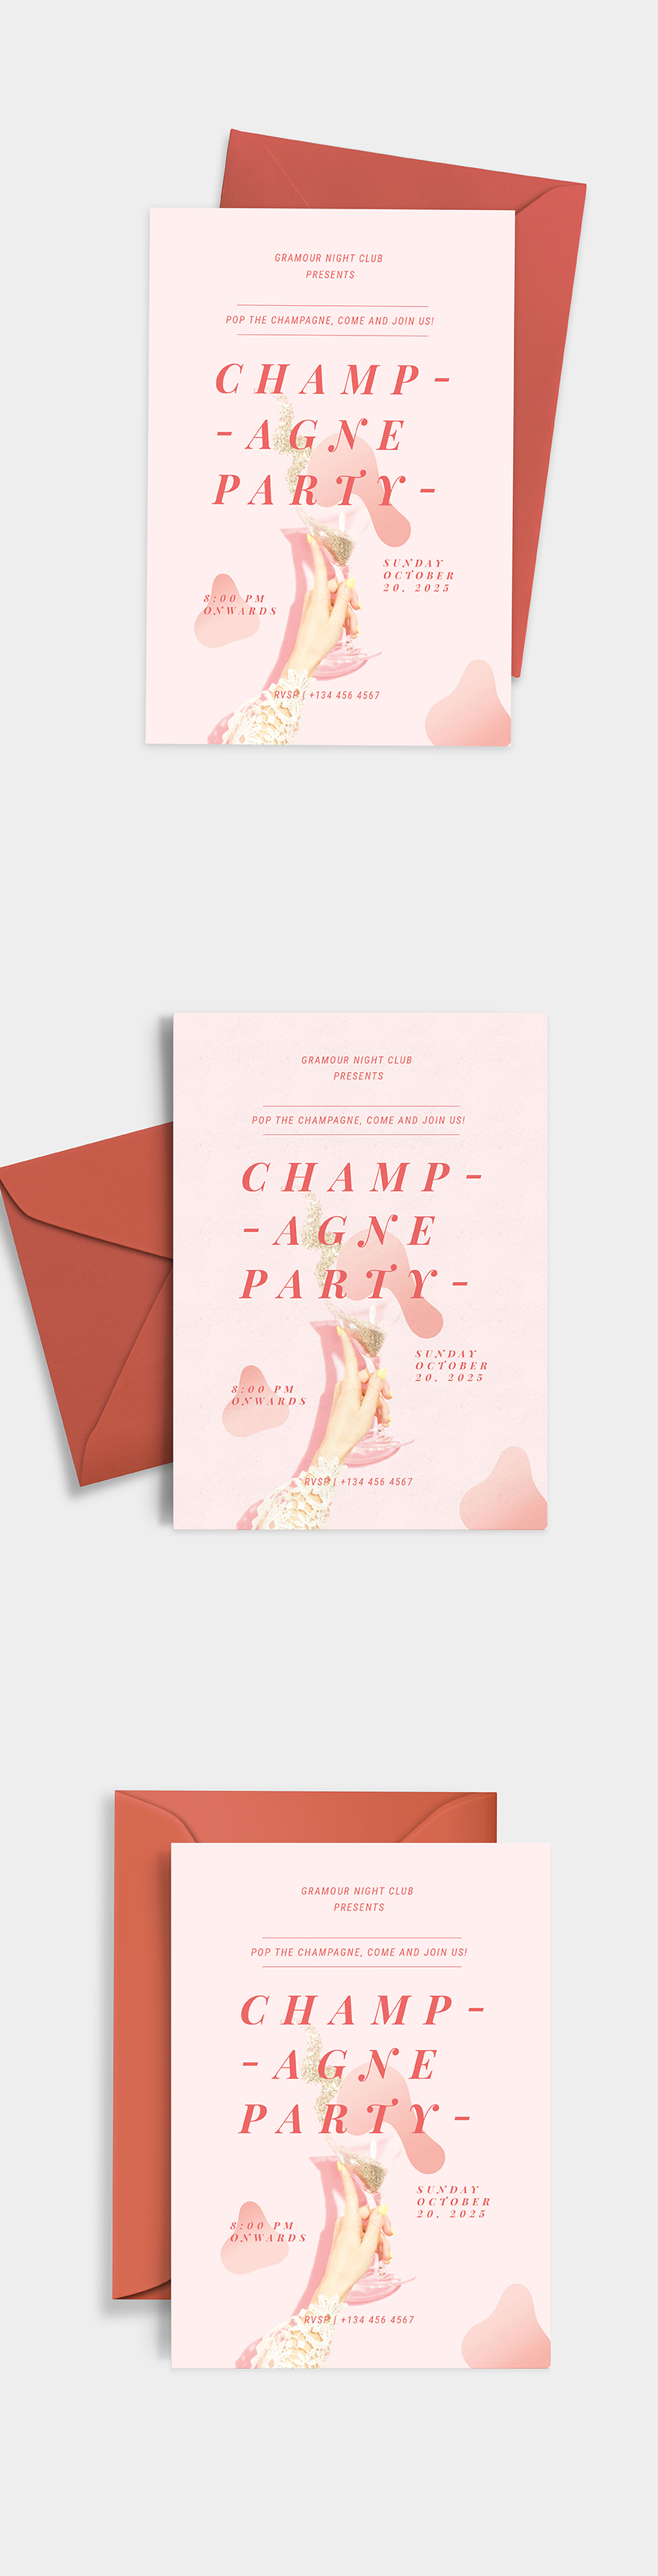 Champagne Party Invitation Template Illustrator Word Outlook Apple